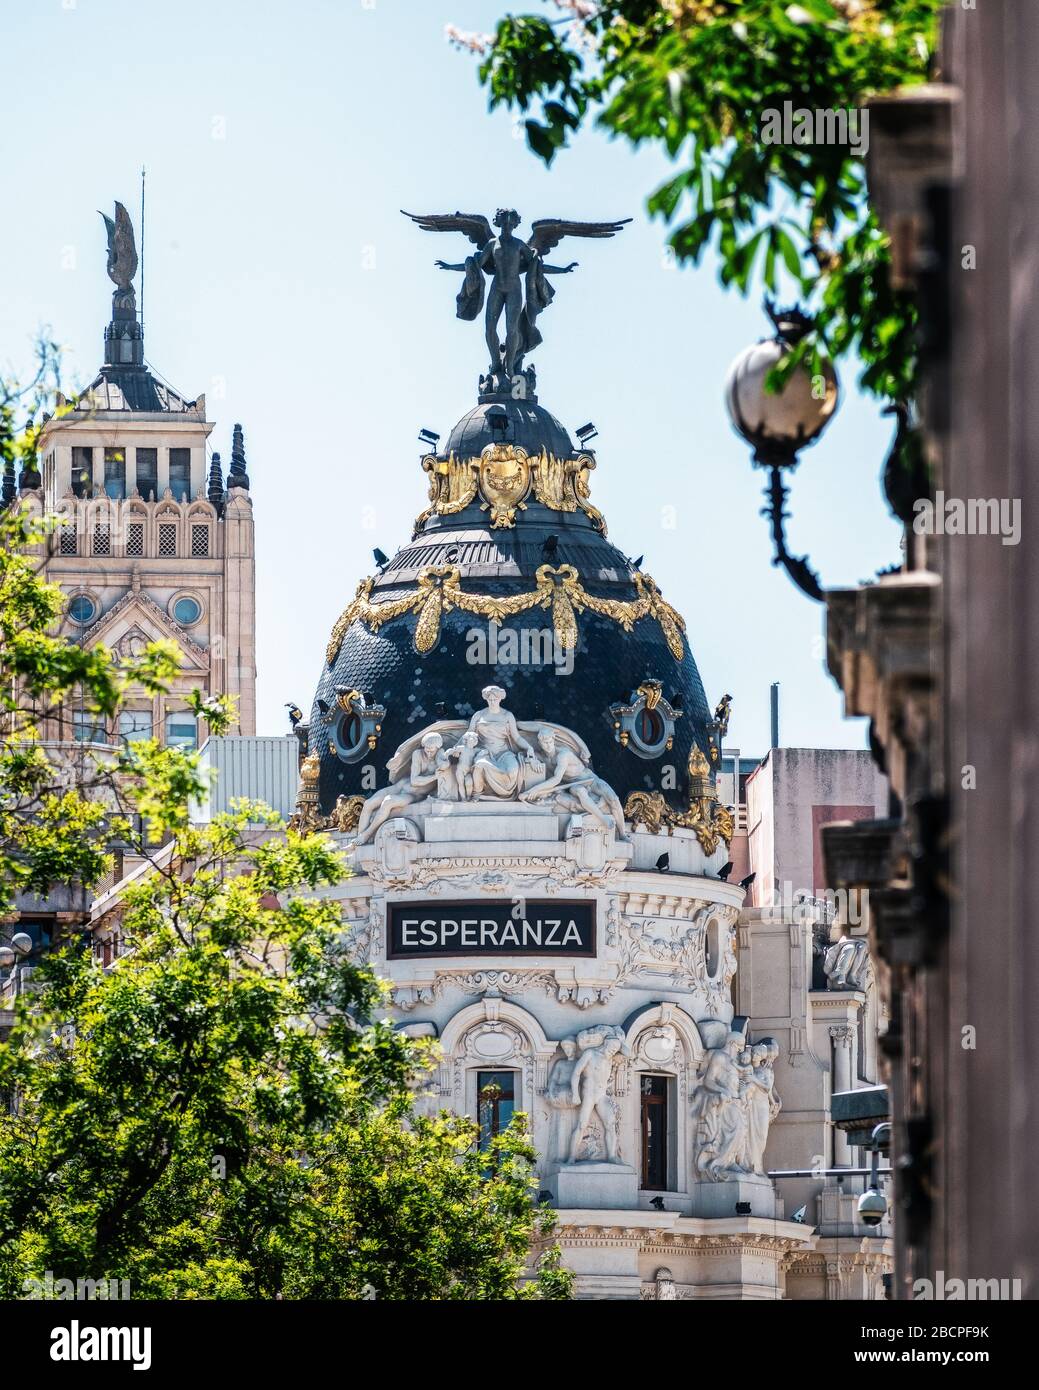 Emblematic buildings in Madrid, with the word "ESPERANZA" message of optimism, due to the crisis of the COVID-19. Spain. Stock Photo